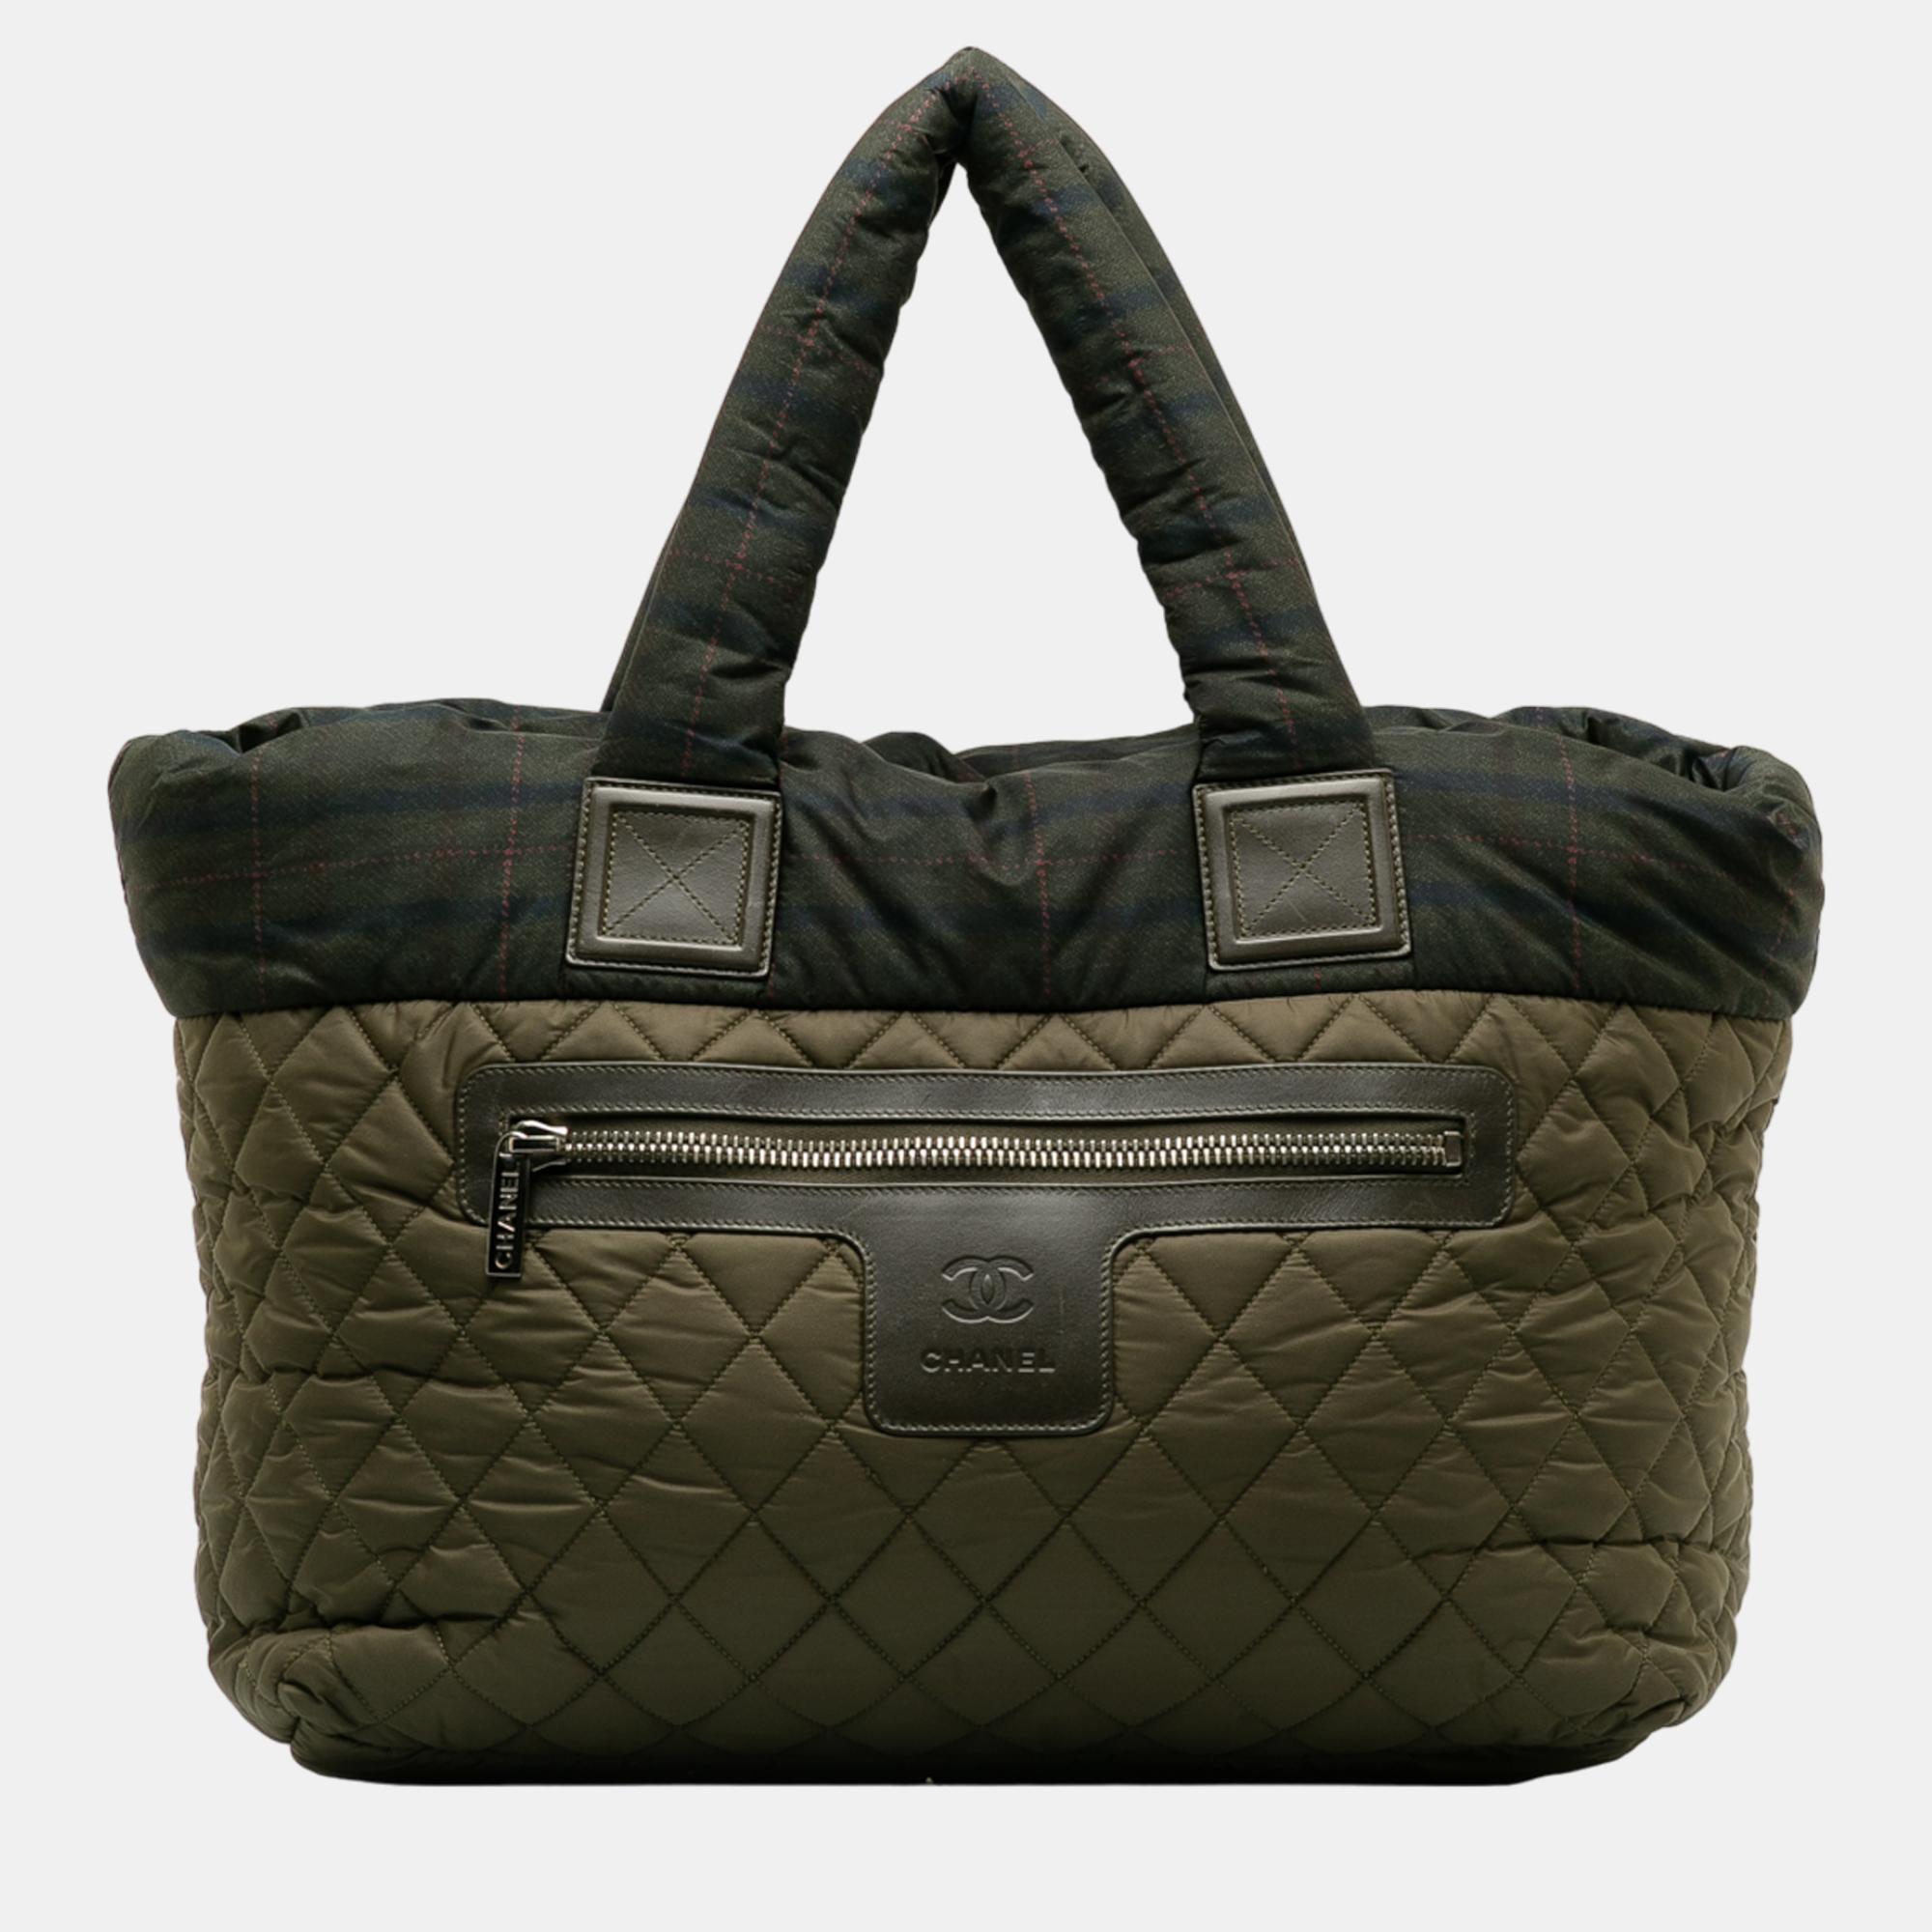 This tote bag features a quilted nylon body rolled handles a top zip closure an exterior front zip pocket and an interior zip pocket.